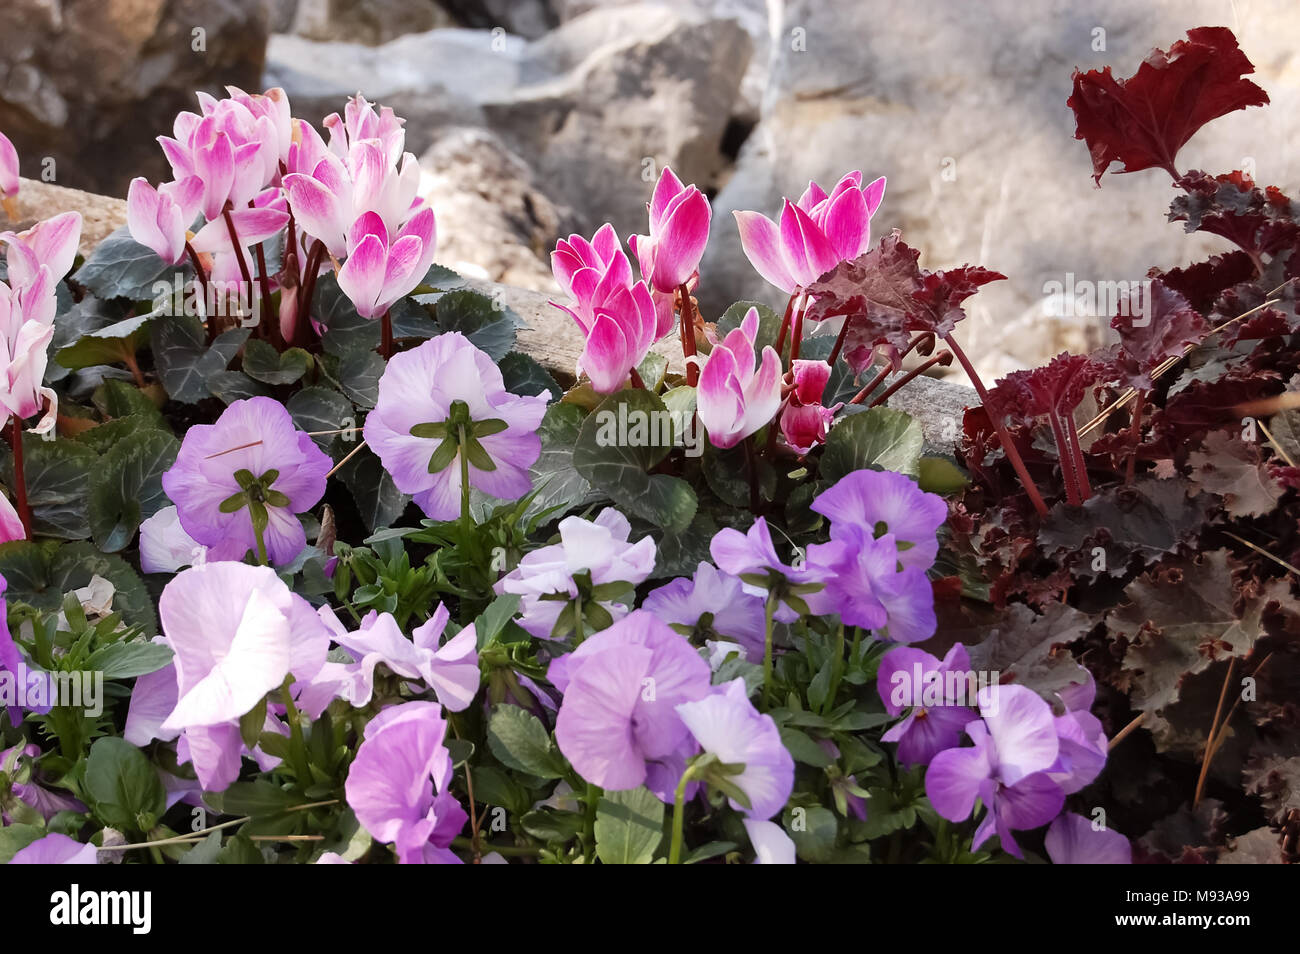 Beautiful flowers of pink cyclamen and purple pansies near the stones on the flowerbed in the spring. Stock Photo